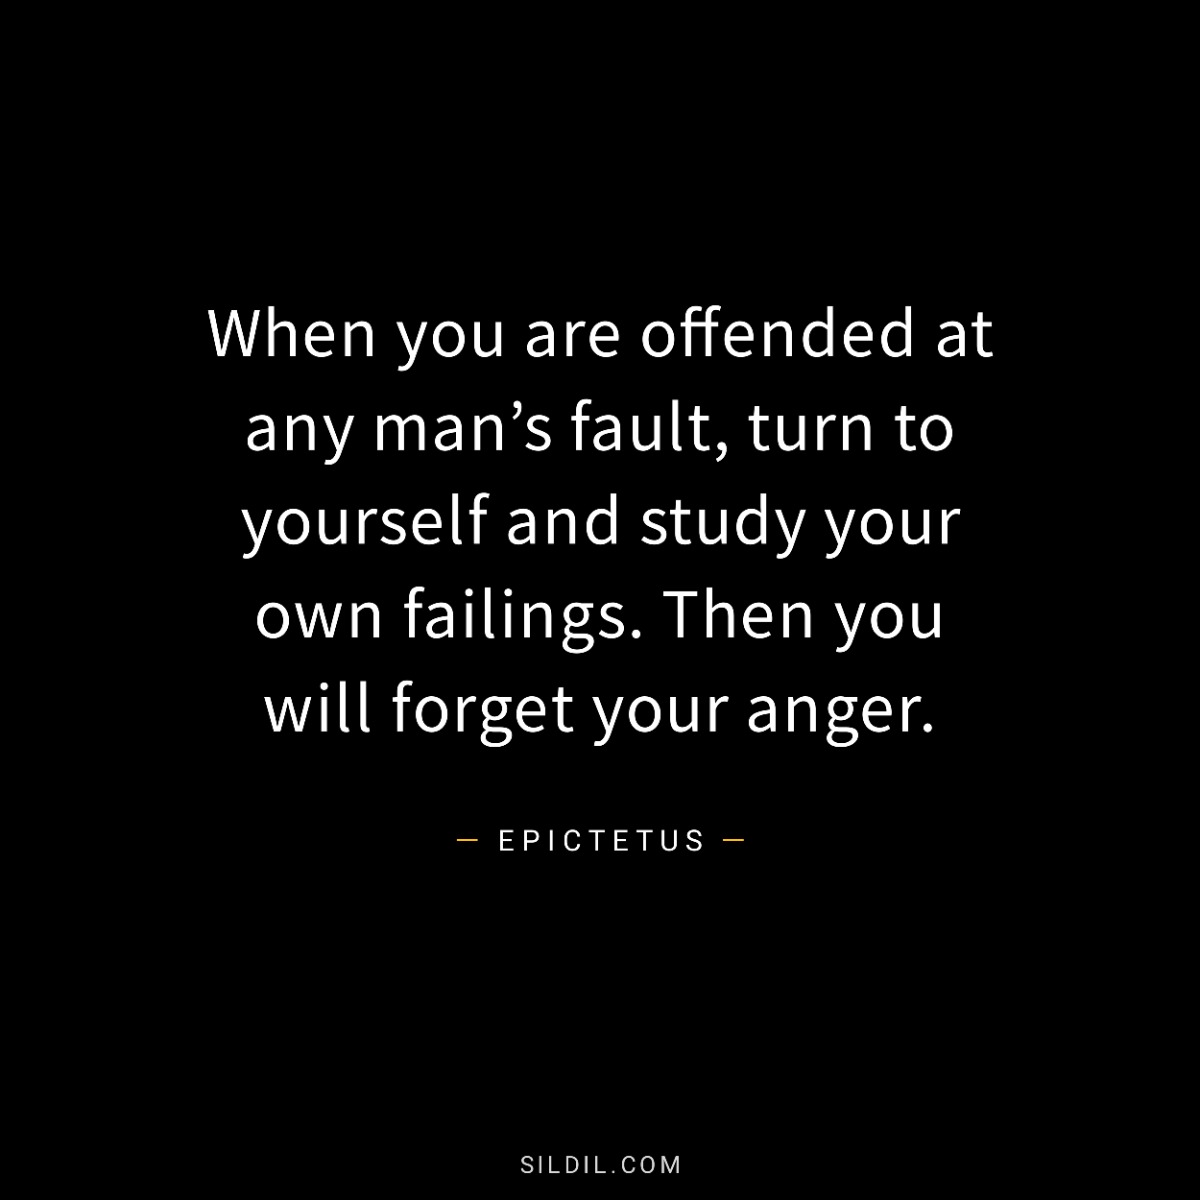 When you are offended at any man’s fault, turn to yourself and study your own failings. Then you will forget your anger.